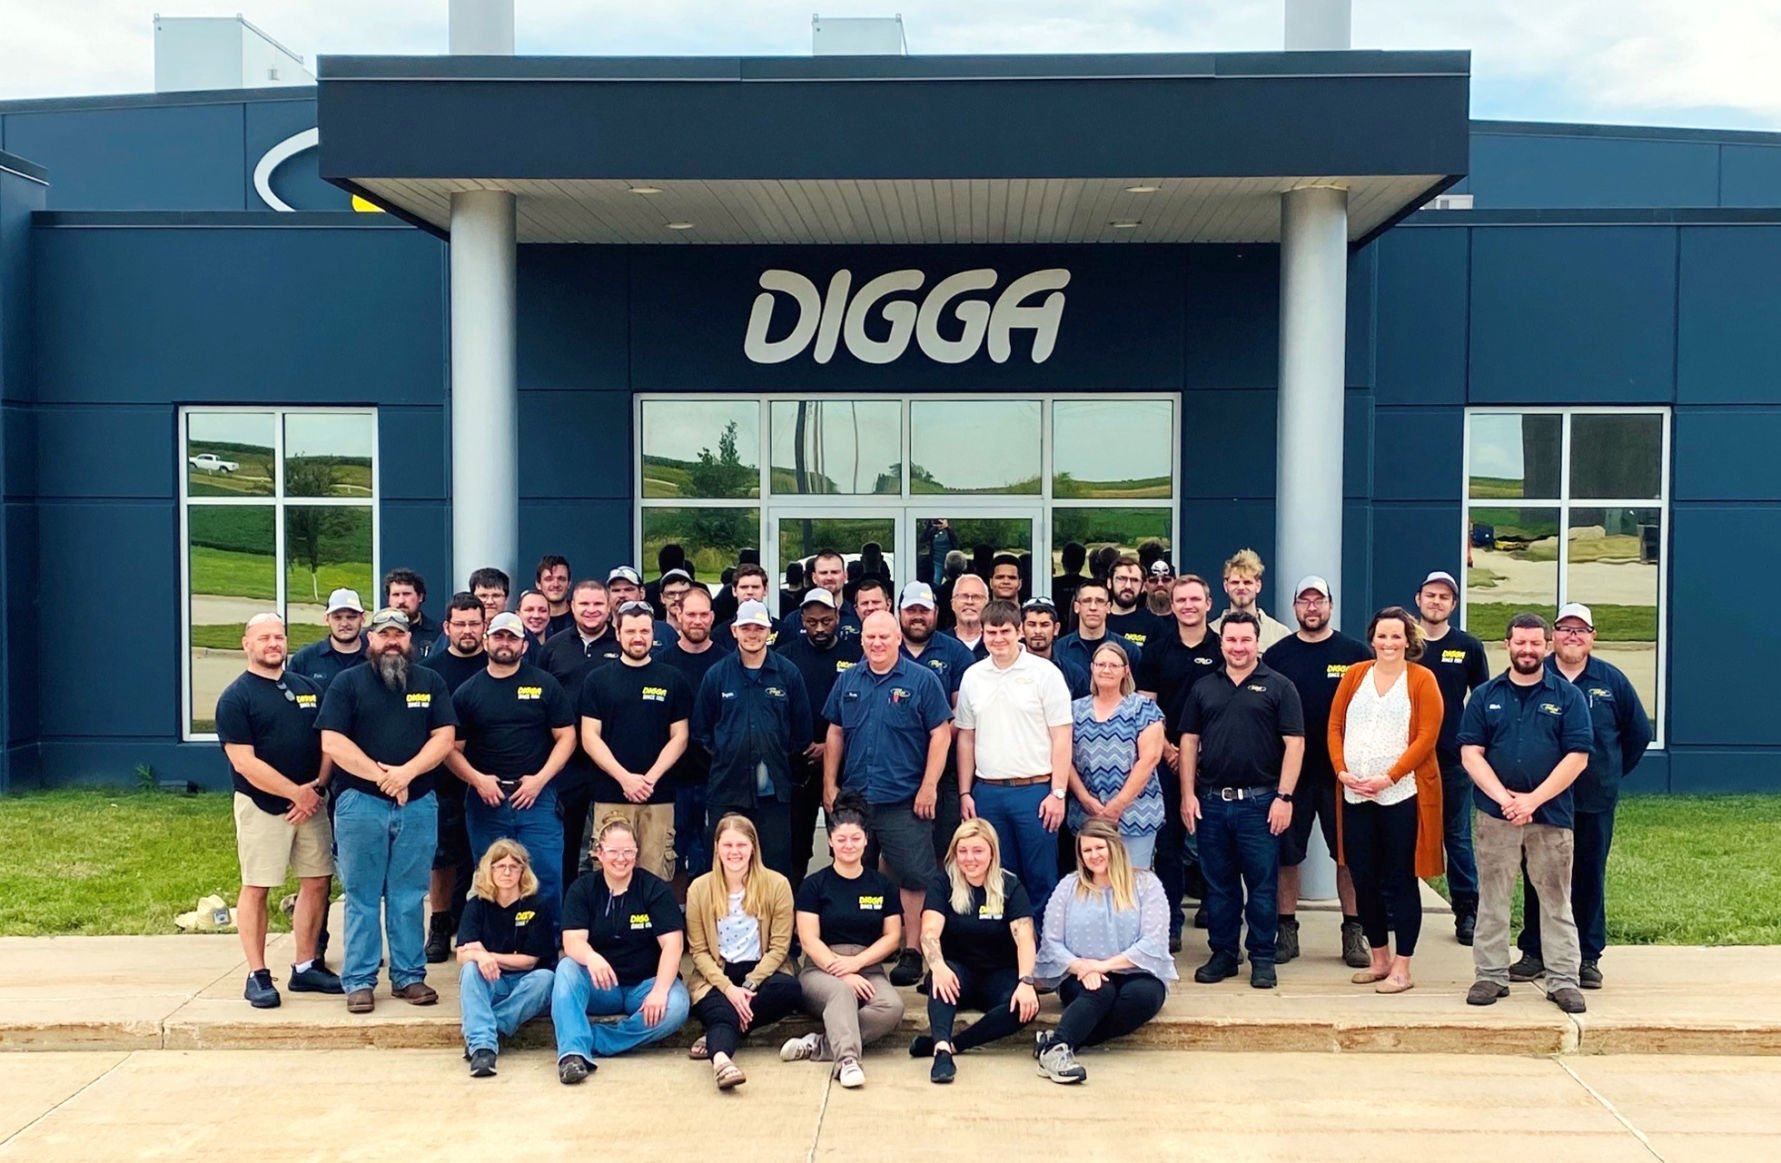 Digga North America employees    PHOTO CREDIT: Contributed